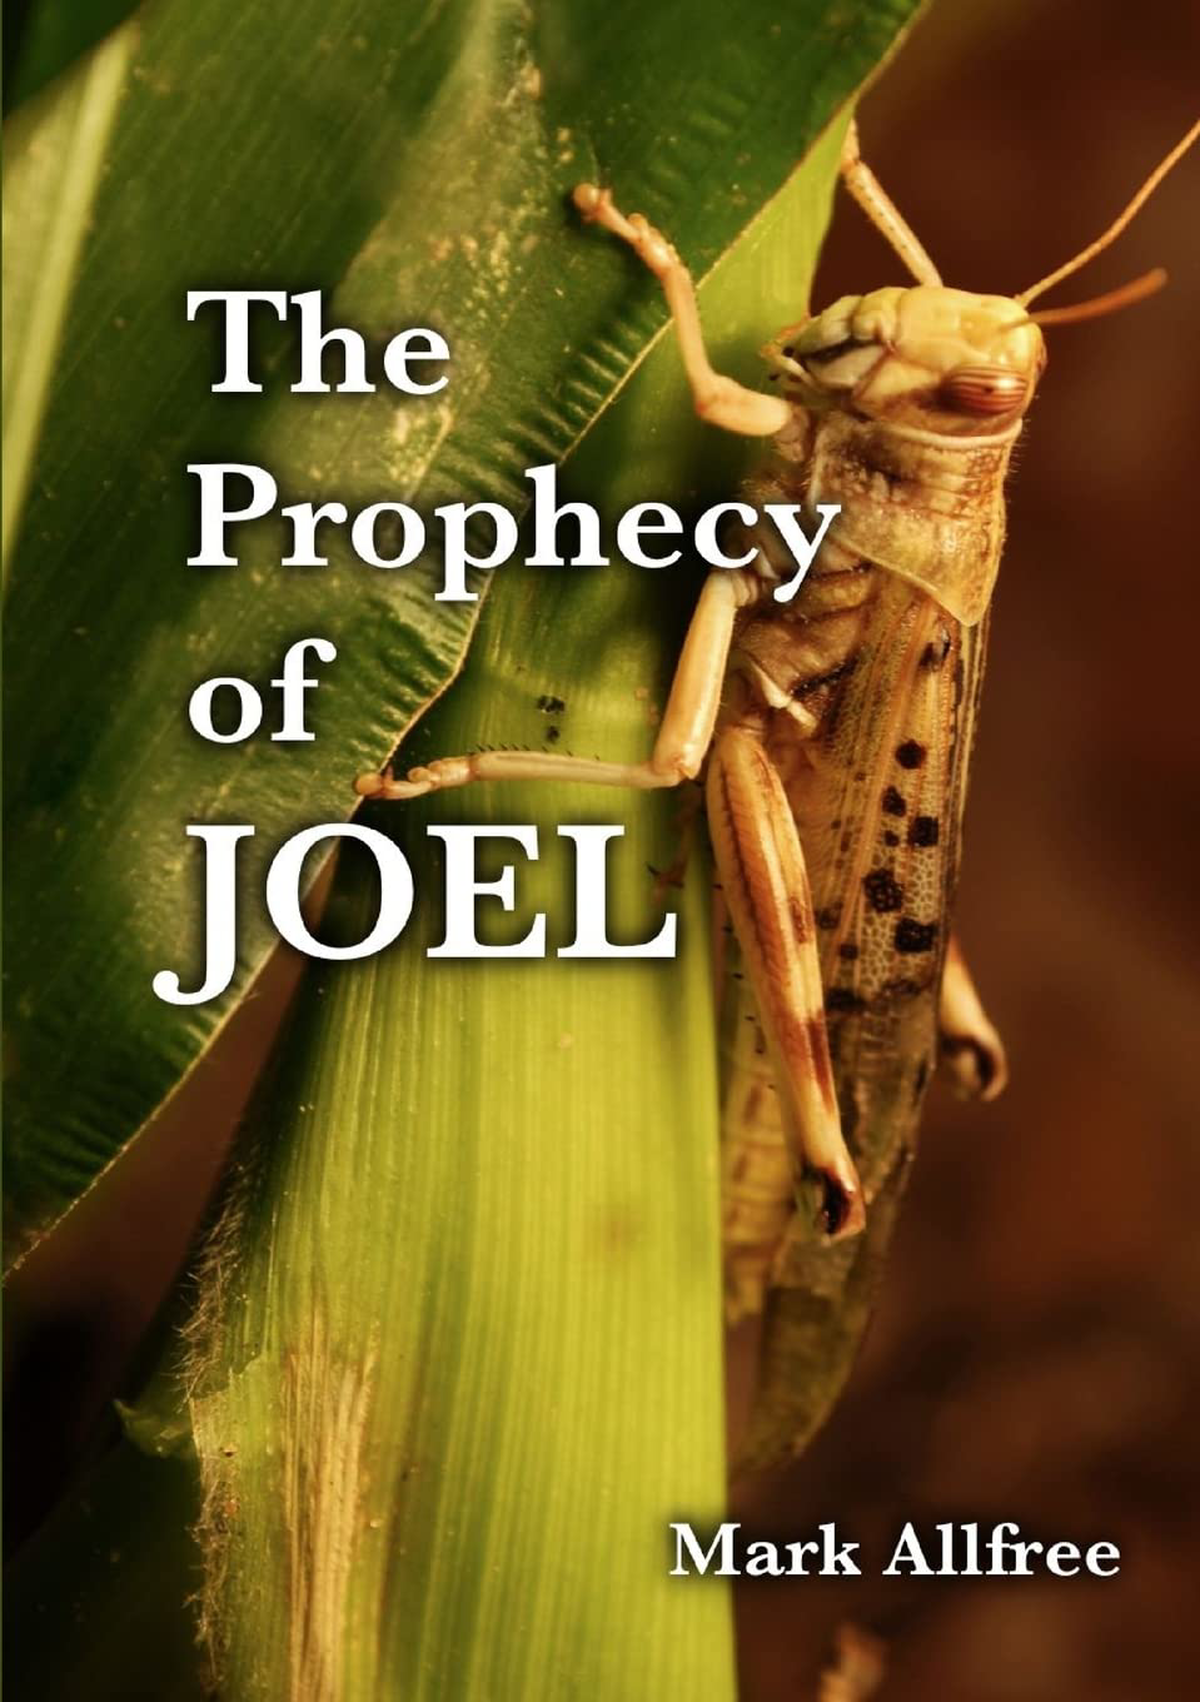 Joel, The Prophecy of